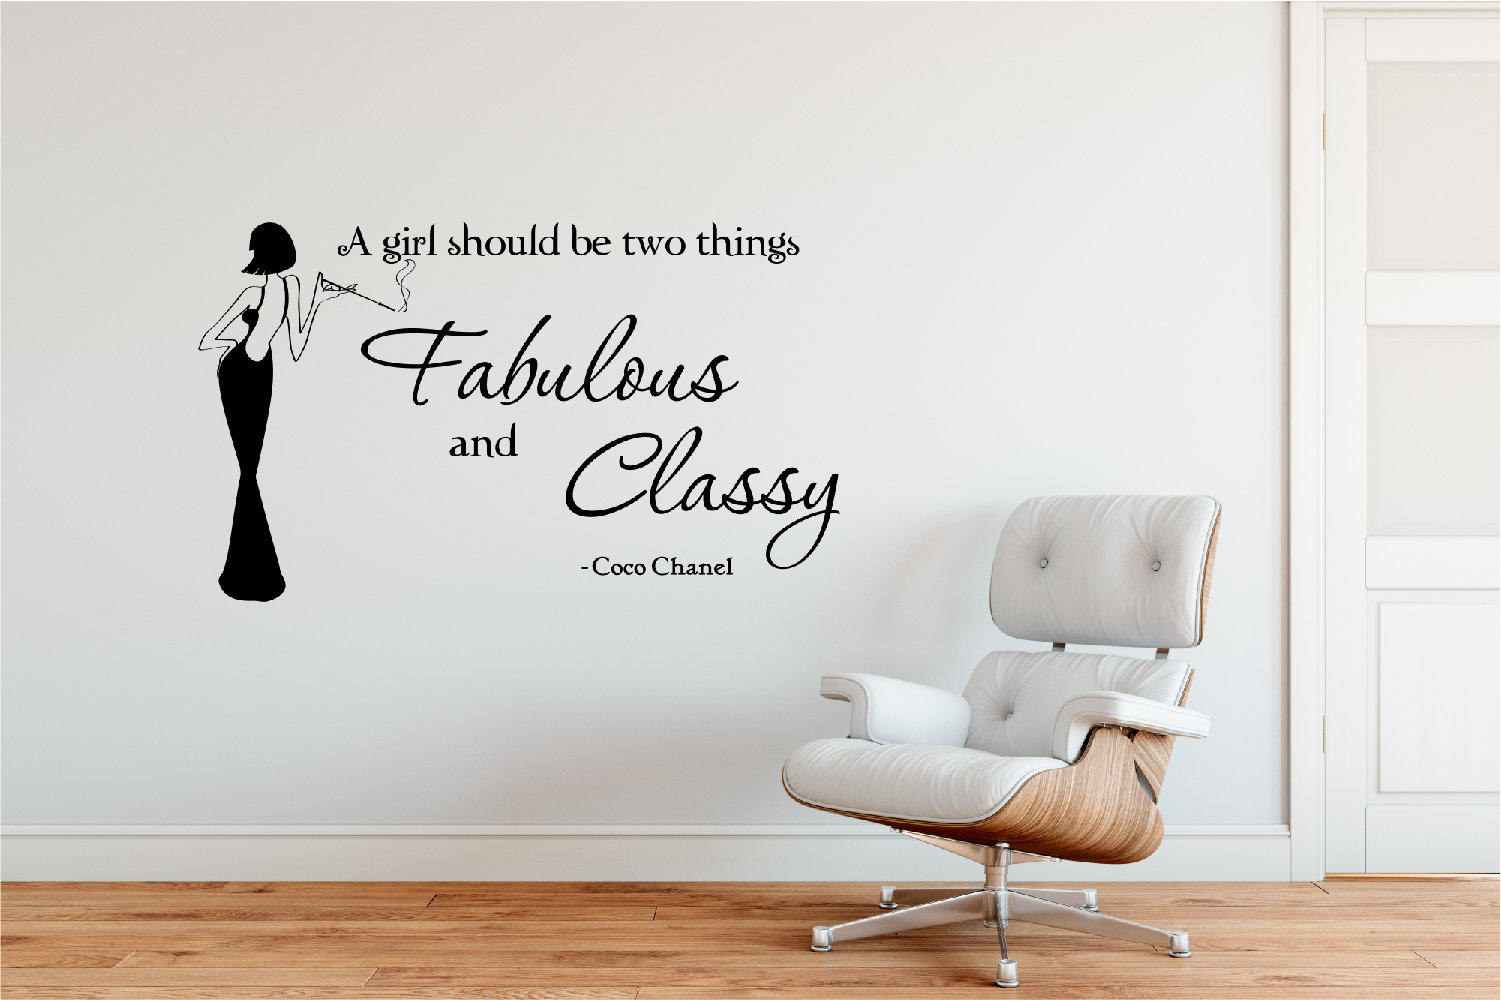 Classy Coco Chanel Quality Wall Decal -